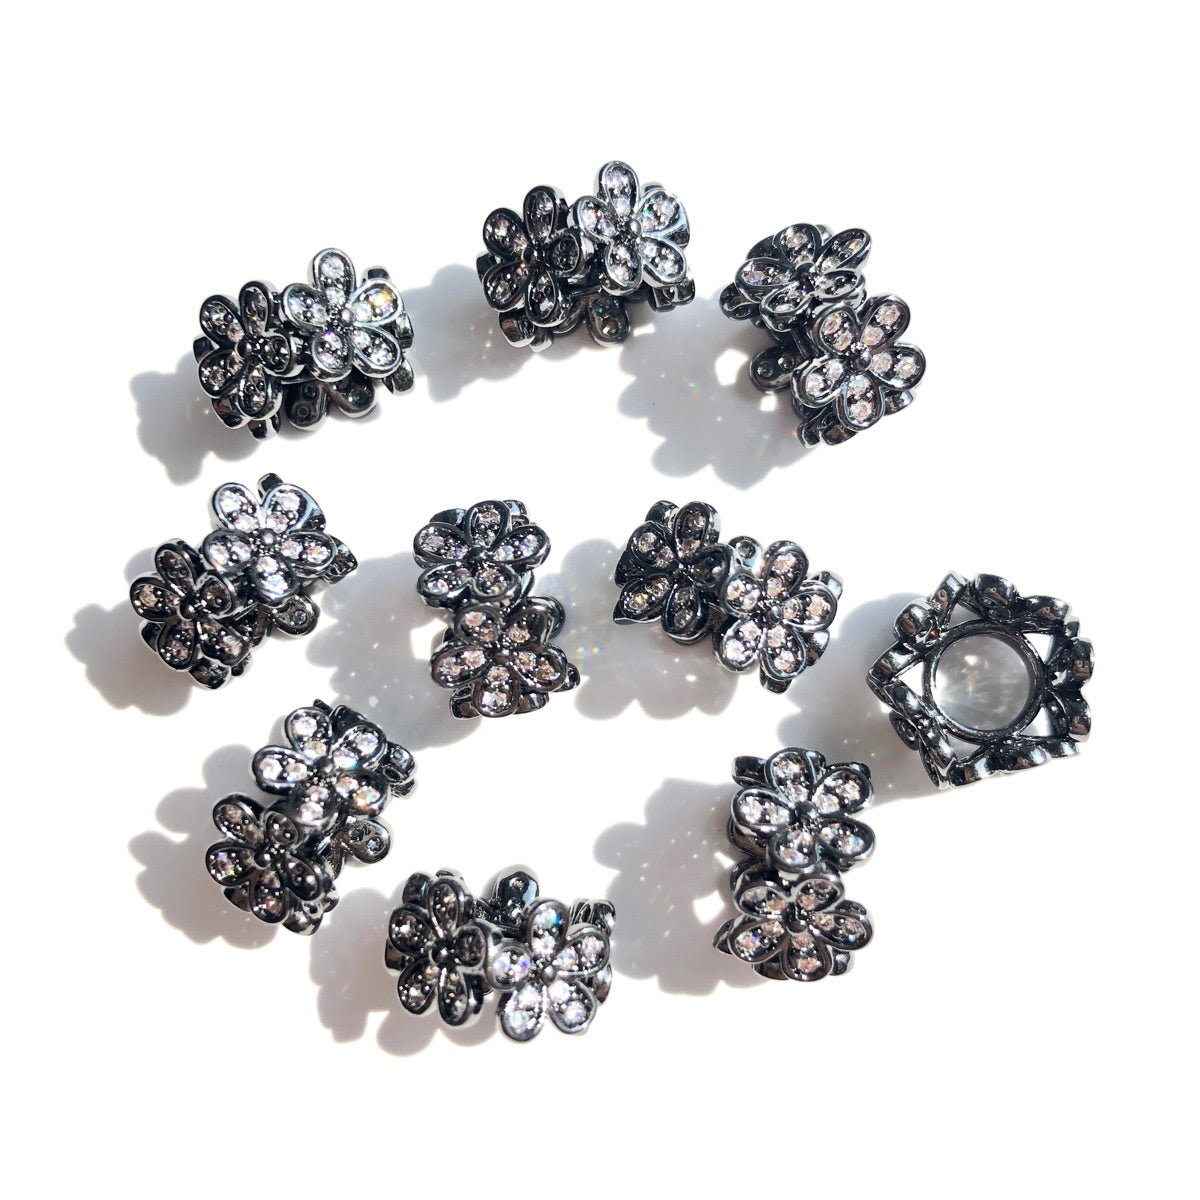 10-20-50pcs/lot 10.6*6.8mm CZ Paved Flower Spacers Clear on Black CZ Paved Spacers New Spacers Arrivals Wholesale Charms Beads Beyond